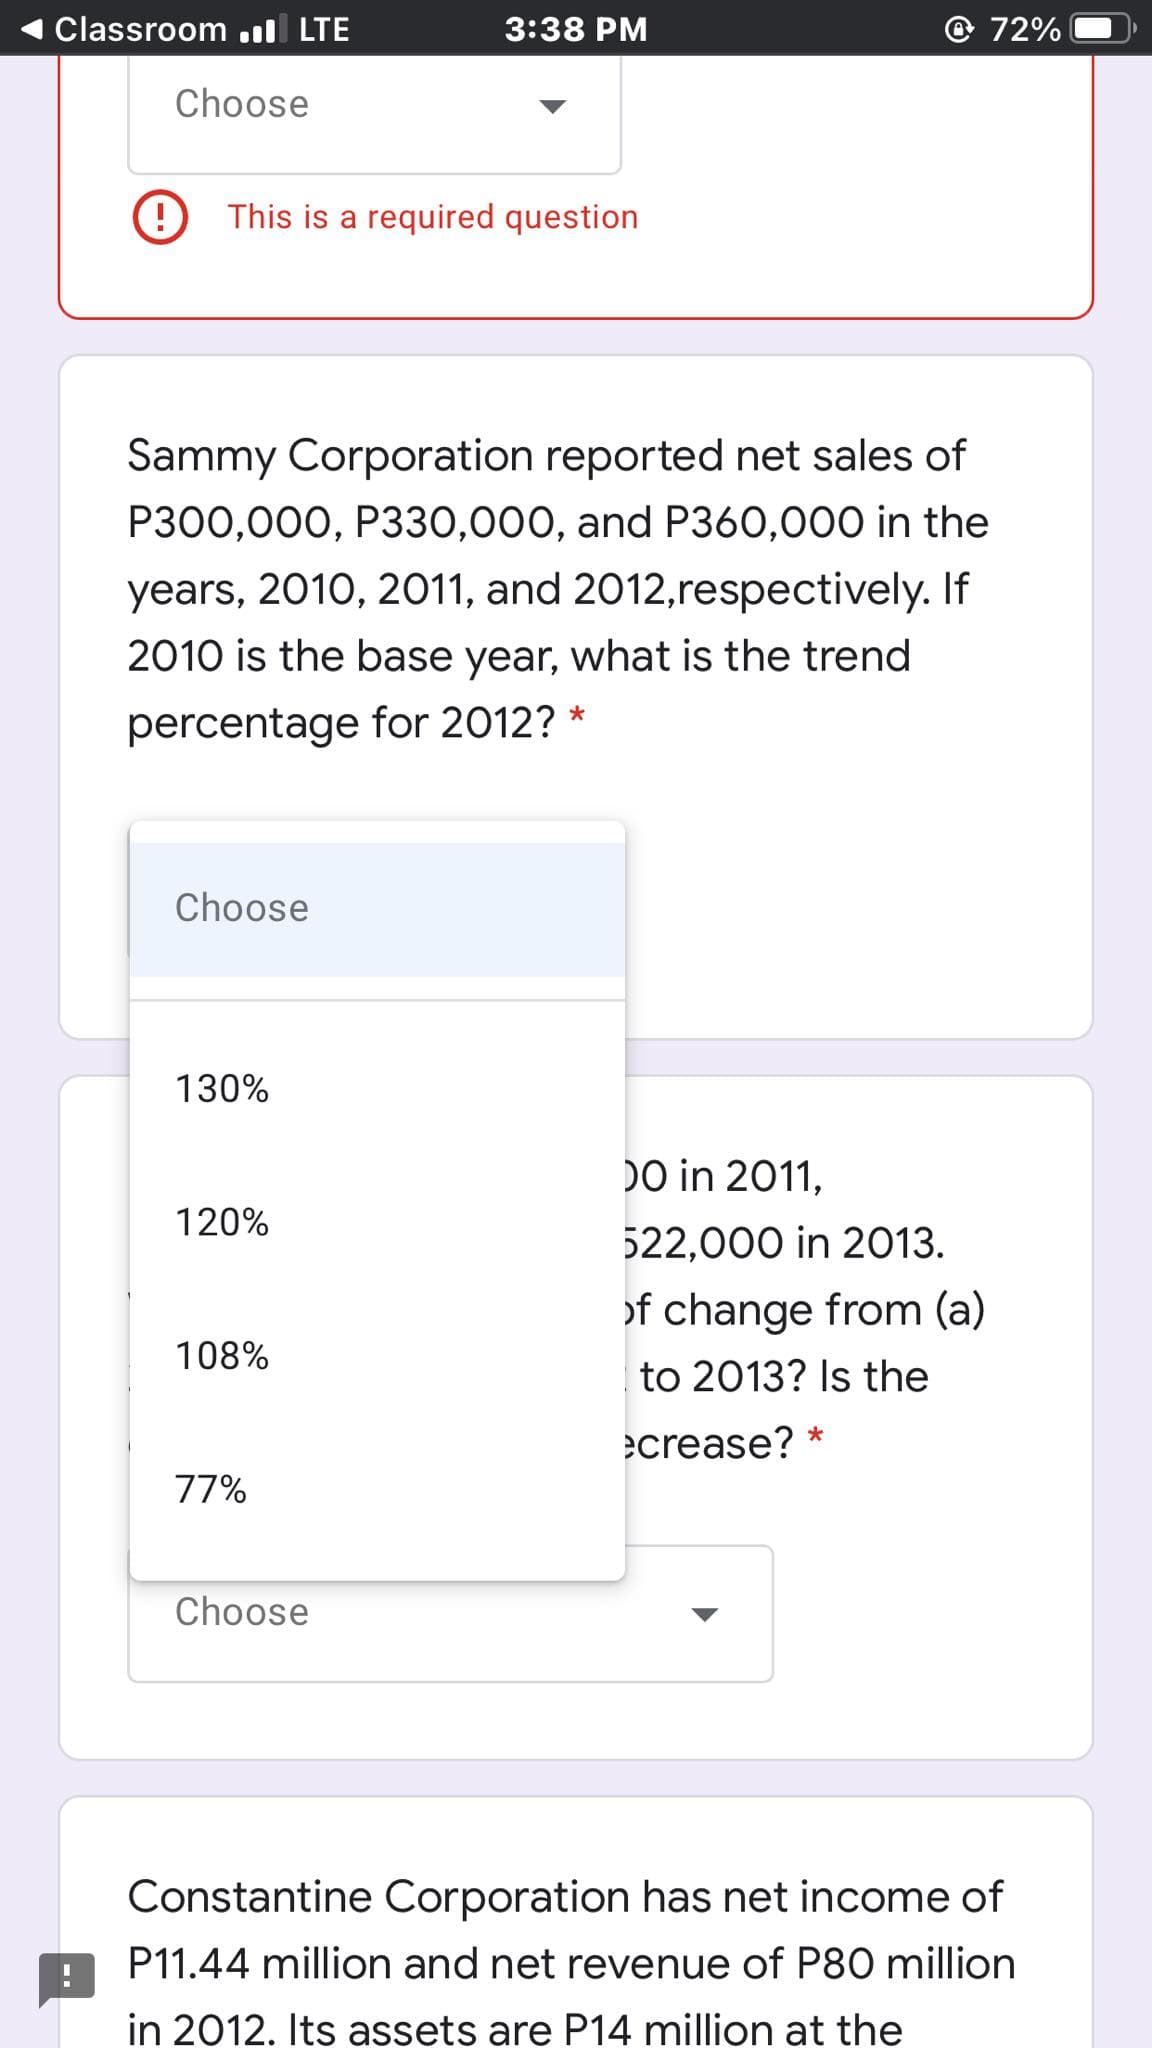 Classroom .ll LTE
3:38 PM
72%
Choose
This is a required question
Sammy Corporation reported net sales of
P300,000, P330,000, and P360,000 in the
years, 2010, 2011, and 2012,respectively. If
2010 is the base year, what is the trend
percentage for 2012? *
Choose
130%
DO in 2011,
120%
522,000 in 2013.
of change from (a)
108%
to 2013? Is the
ecrease? *
77%
Choose
Constantine Corporation has net income of
P11.44 million and net revenue of P80 million
in 2012. Its assets are P14 million at the
